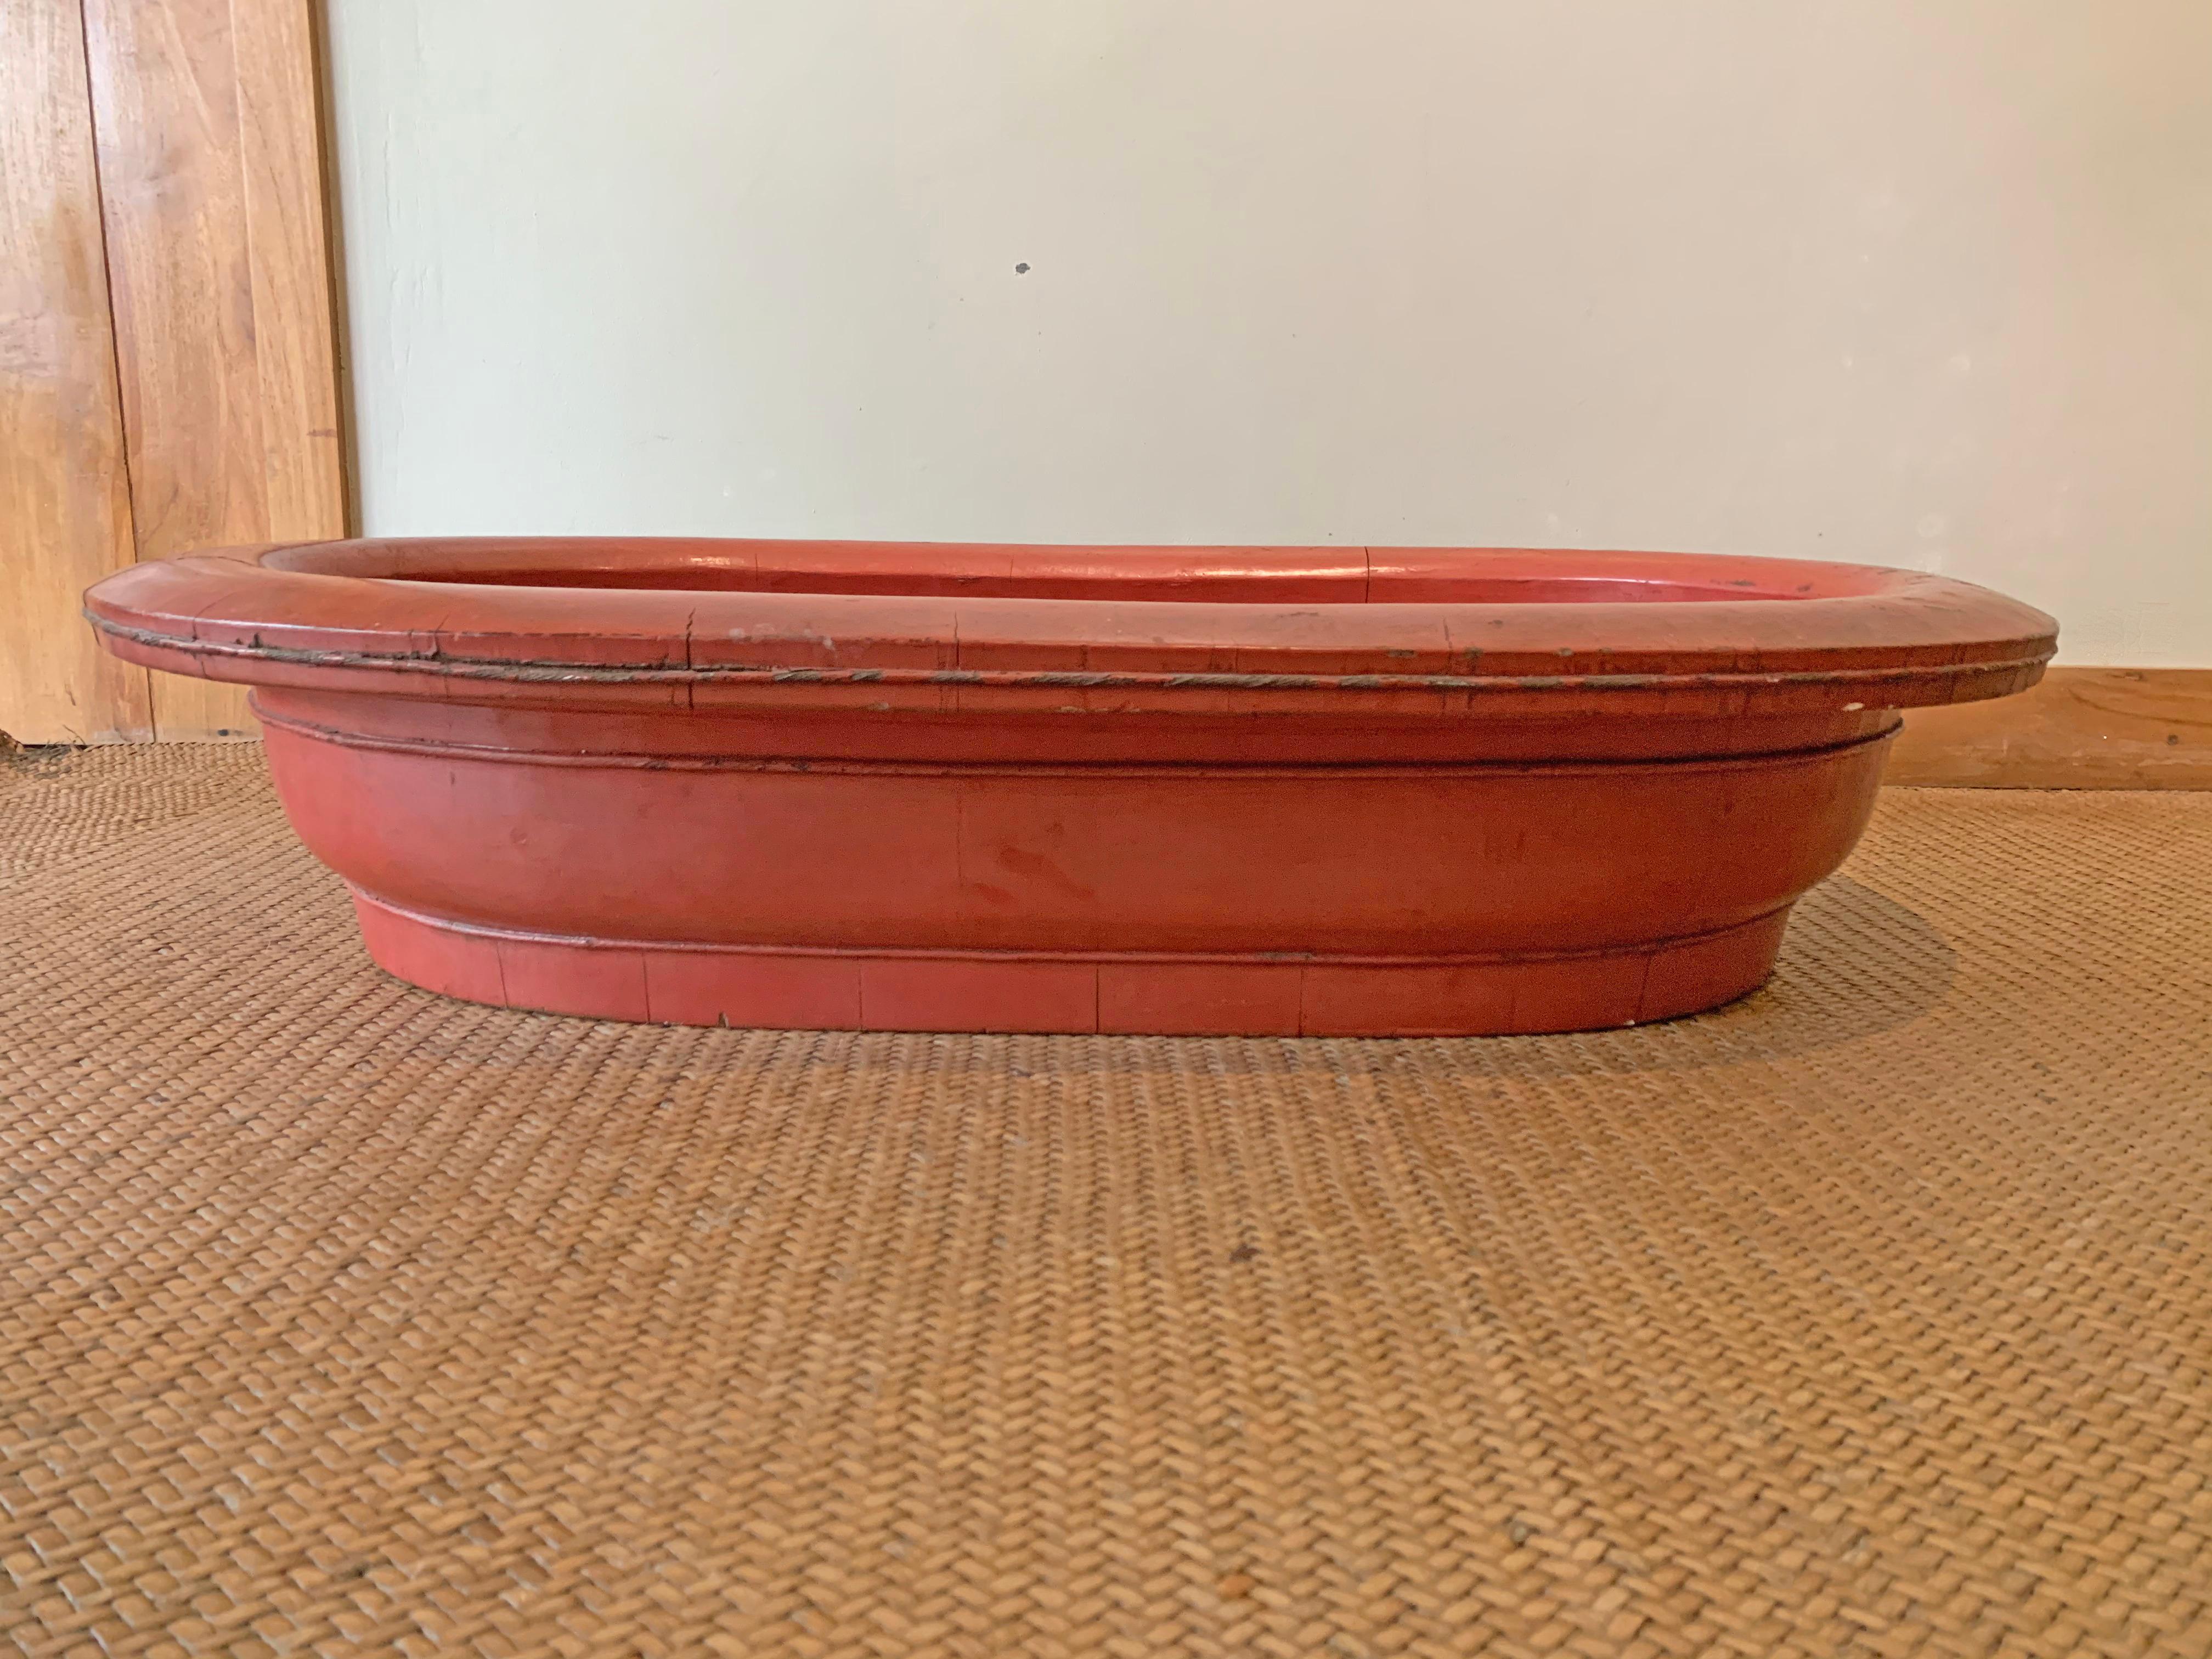 A Chinese Red Lacquer Wood Bowl with a unique oval shape and of exceptional size from the early 20th Century. The age related cracks that have formed on its outer-side add to its appeal. Its large size makes it perfect as a centre display piece on a